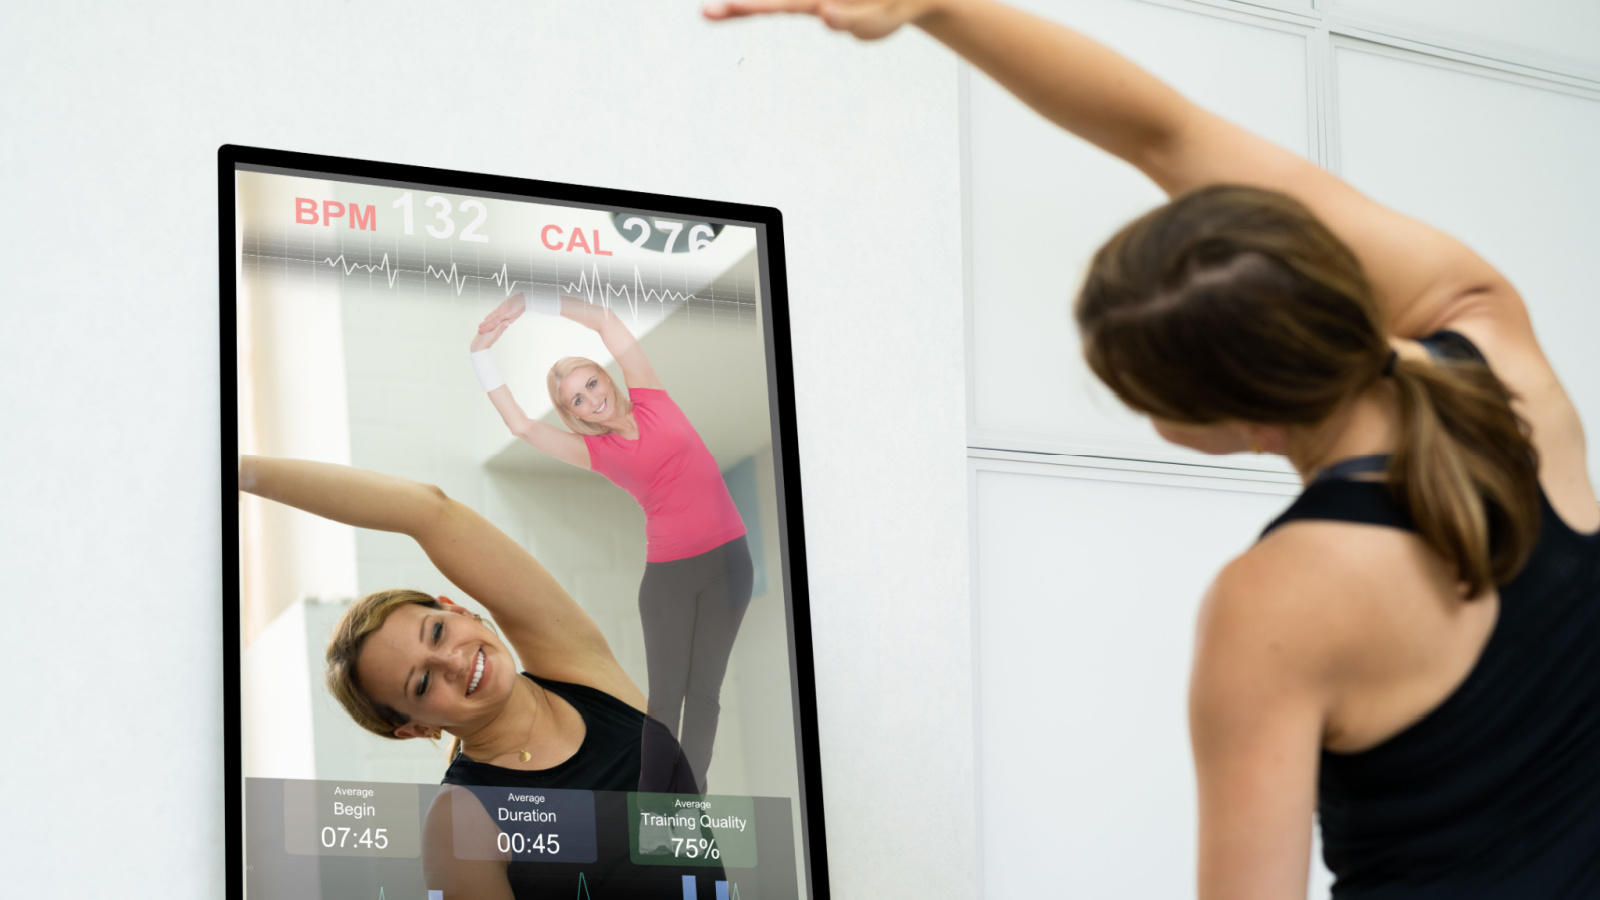 image credit: Andrey Popov/Shutterstock <p><span>These sleek, high-tech mirrors are transforming home gyms. When turned off, they’re a stylish, full-length mirror. When turned on, they’re an interactive workout platform with live and on-demand classes spanning from yoga to boxing. They track your movements, offer corrections, and immerse you in a class environment without stepping out of your home.</span></p>